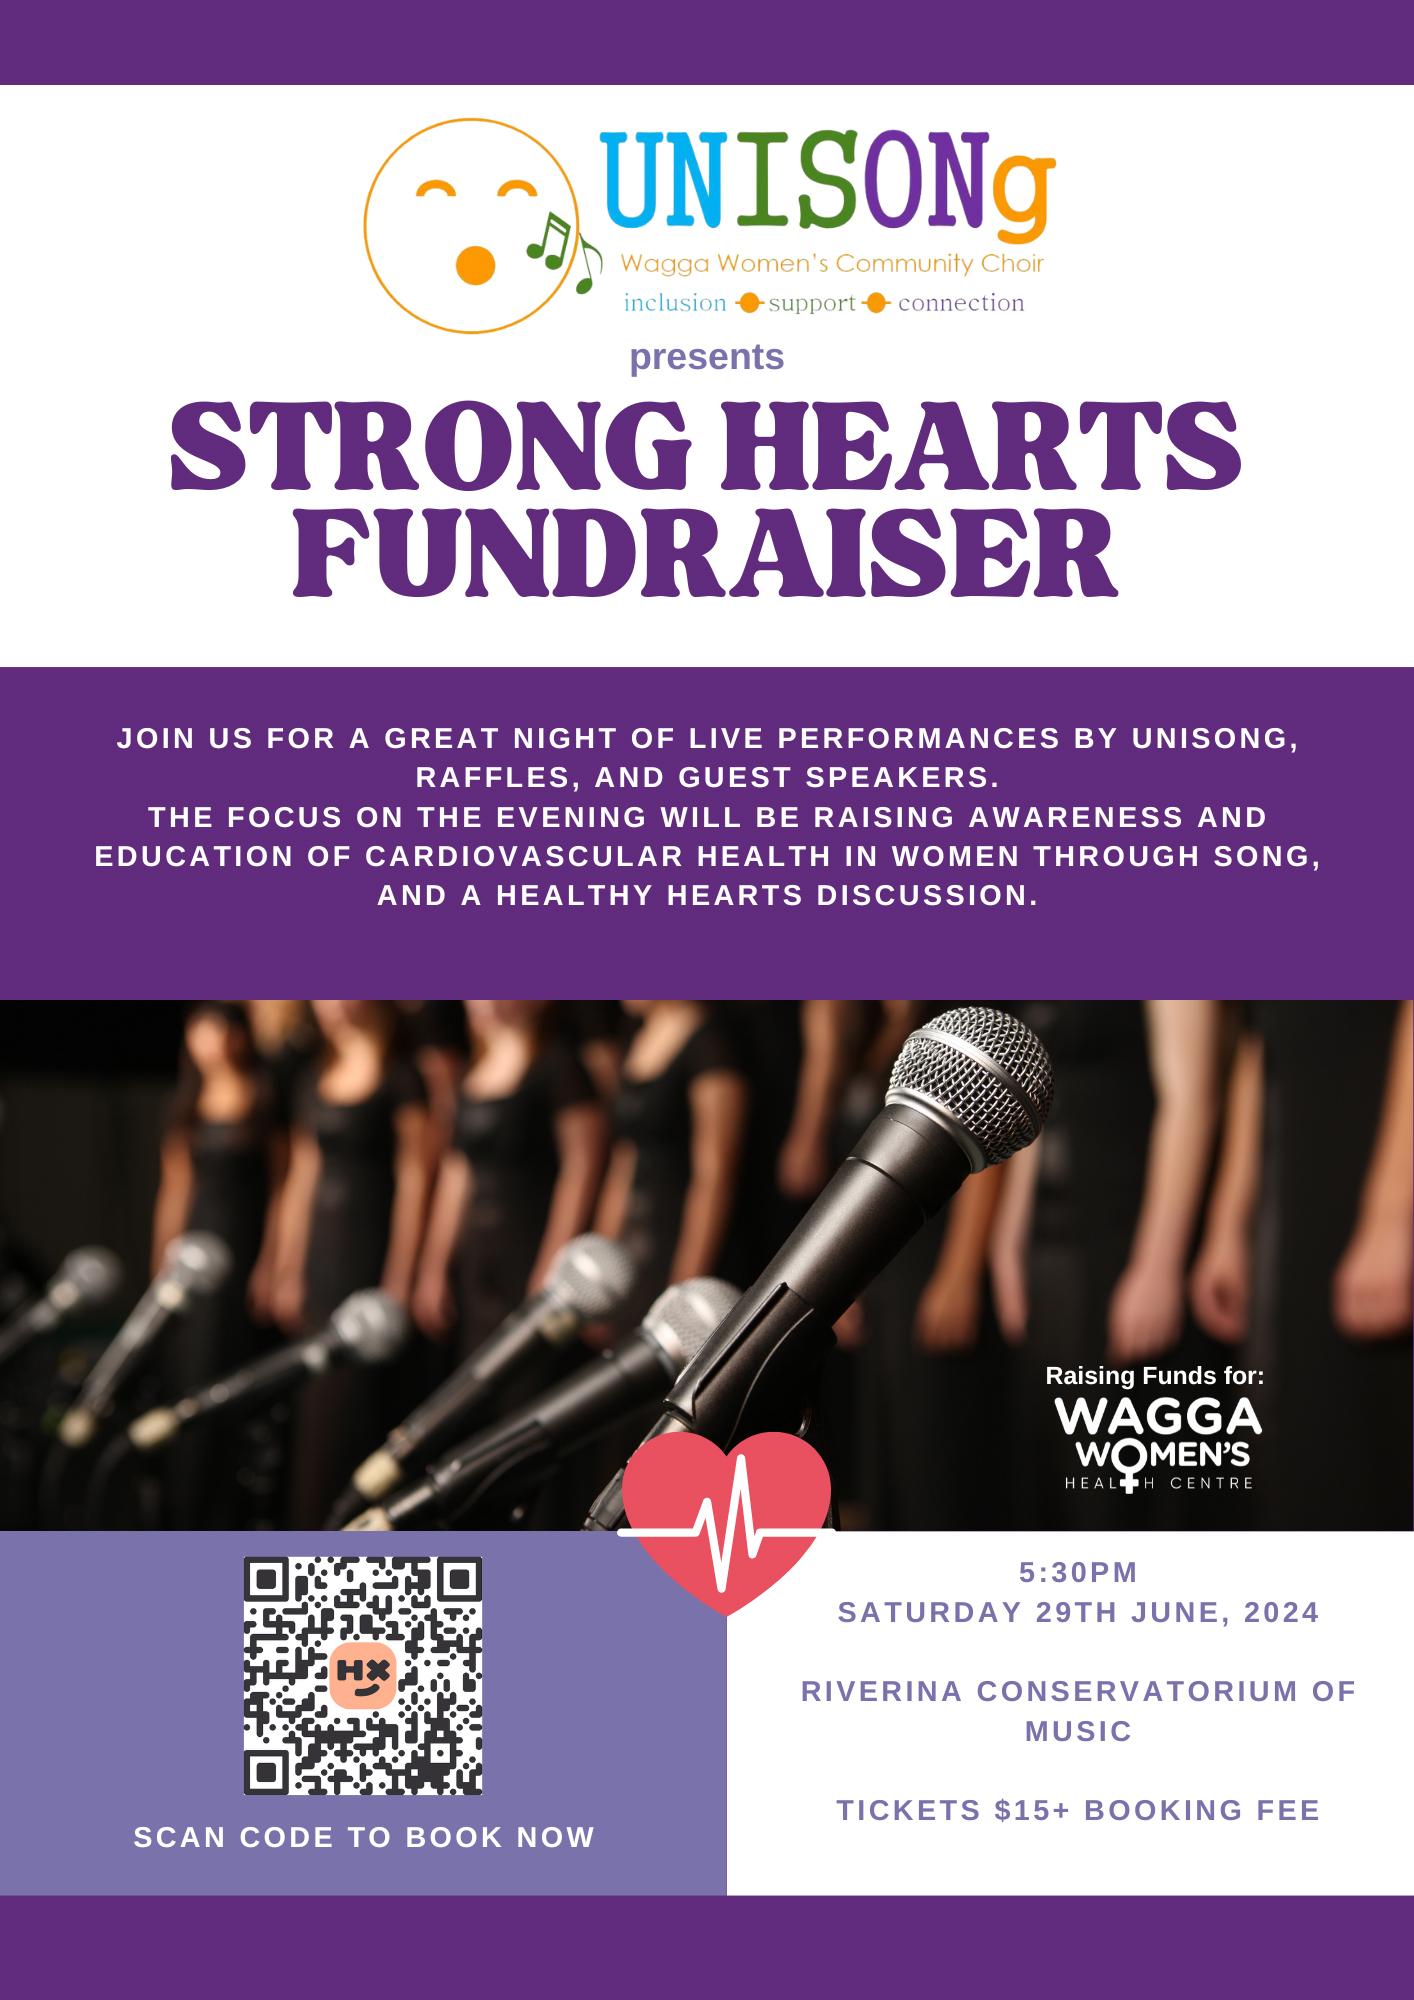 STRONG HEARTS FUNDRAISER